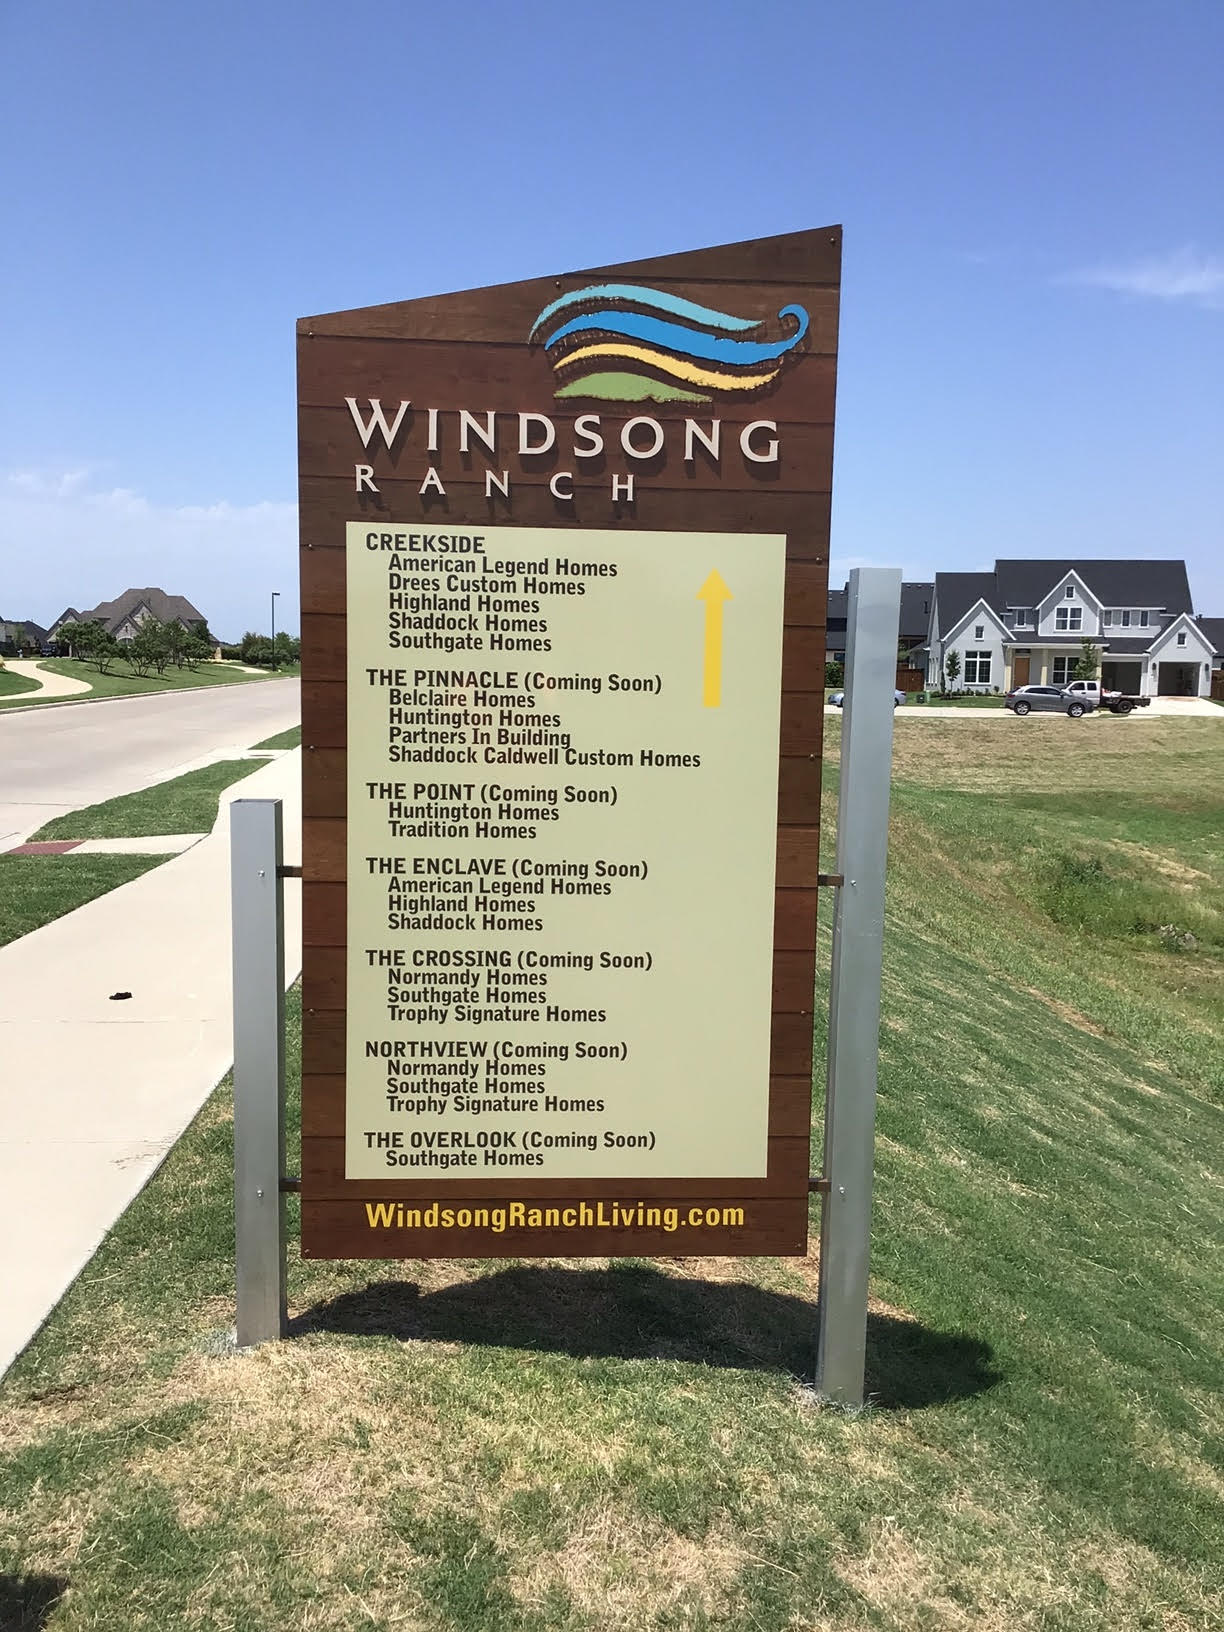 Post and pylon sign for Windsong Ranch made by Sign Company in Dallas Fort Worth, TX